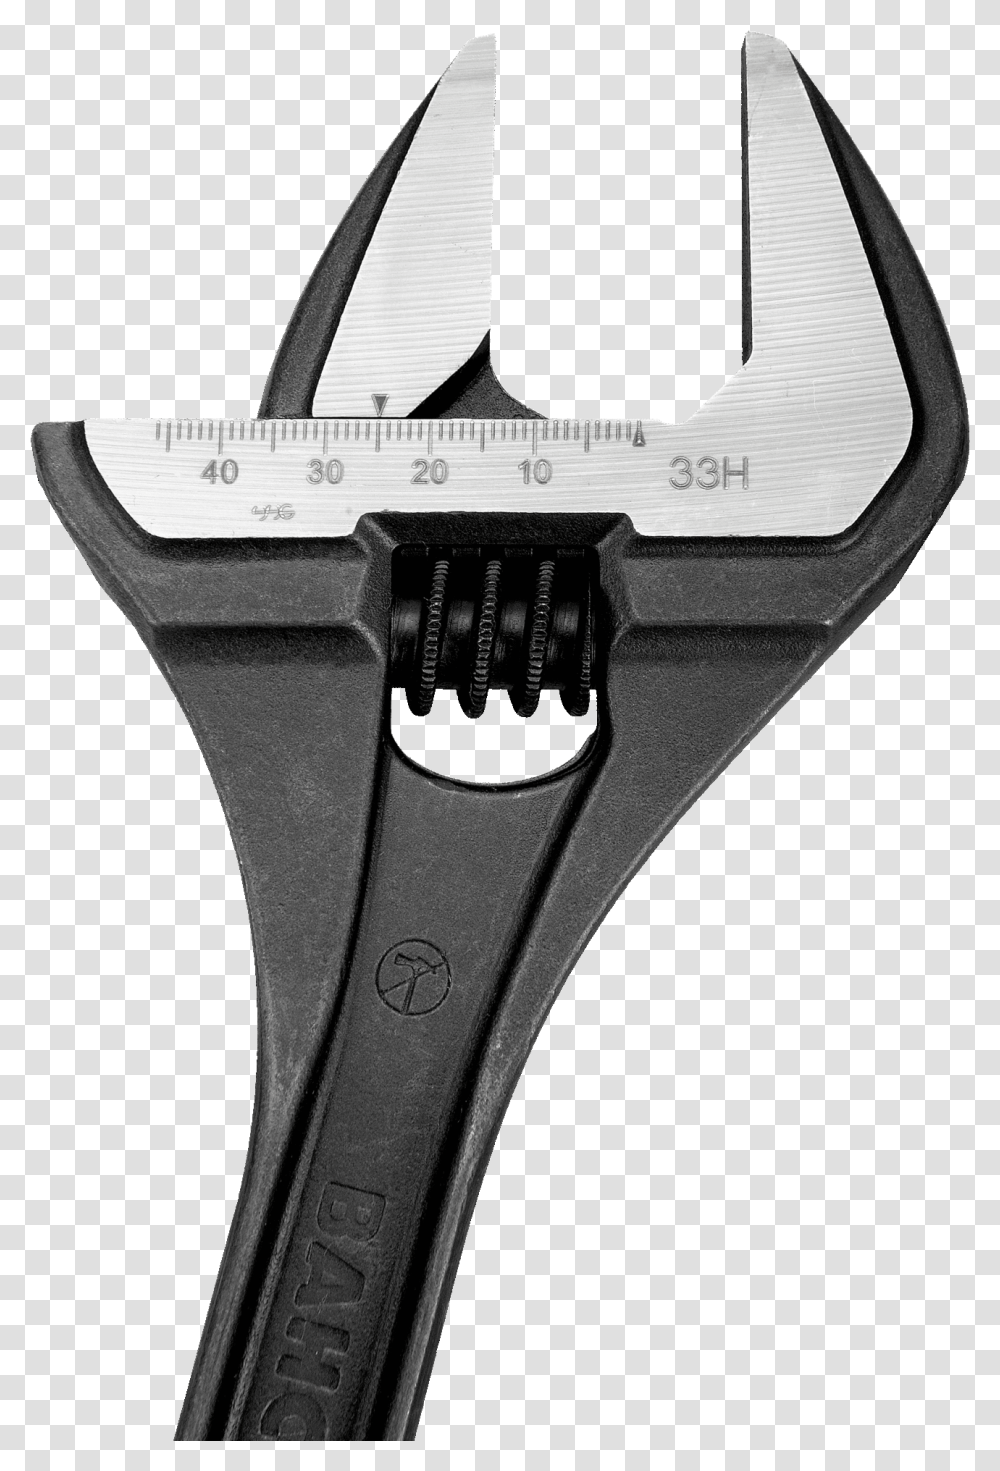 Adjustable Spanner, Wrench, Gun, Weapon, Weaponry Transparent Png